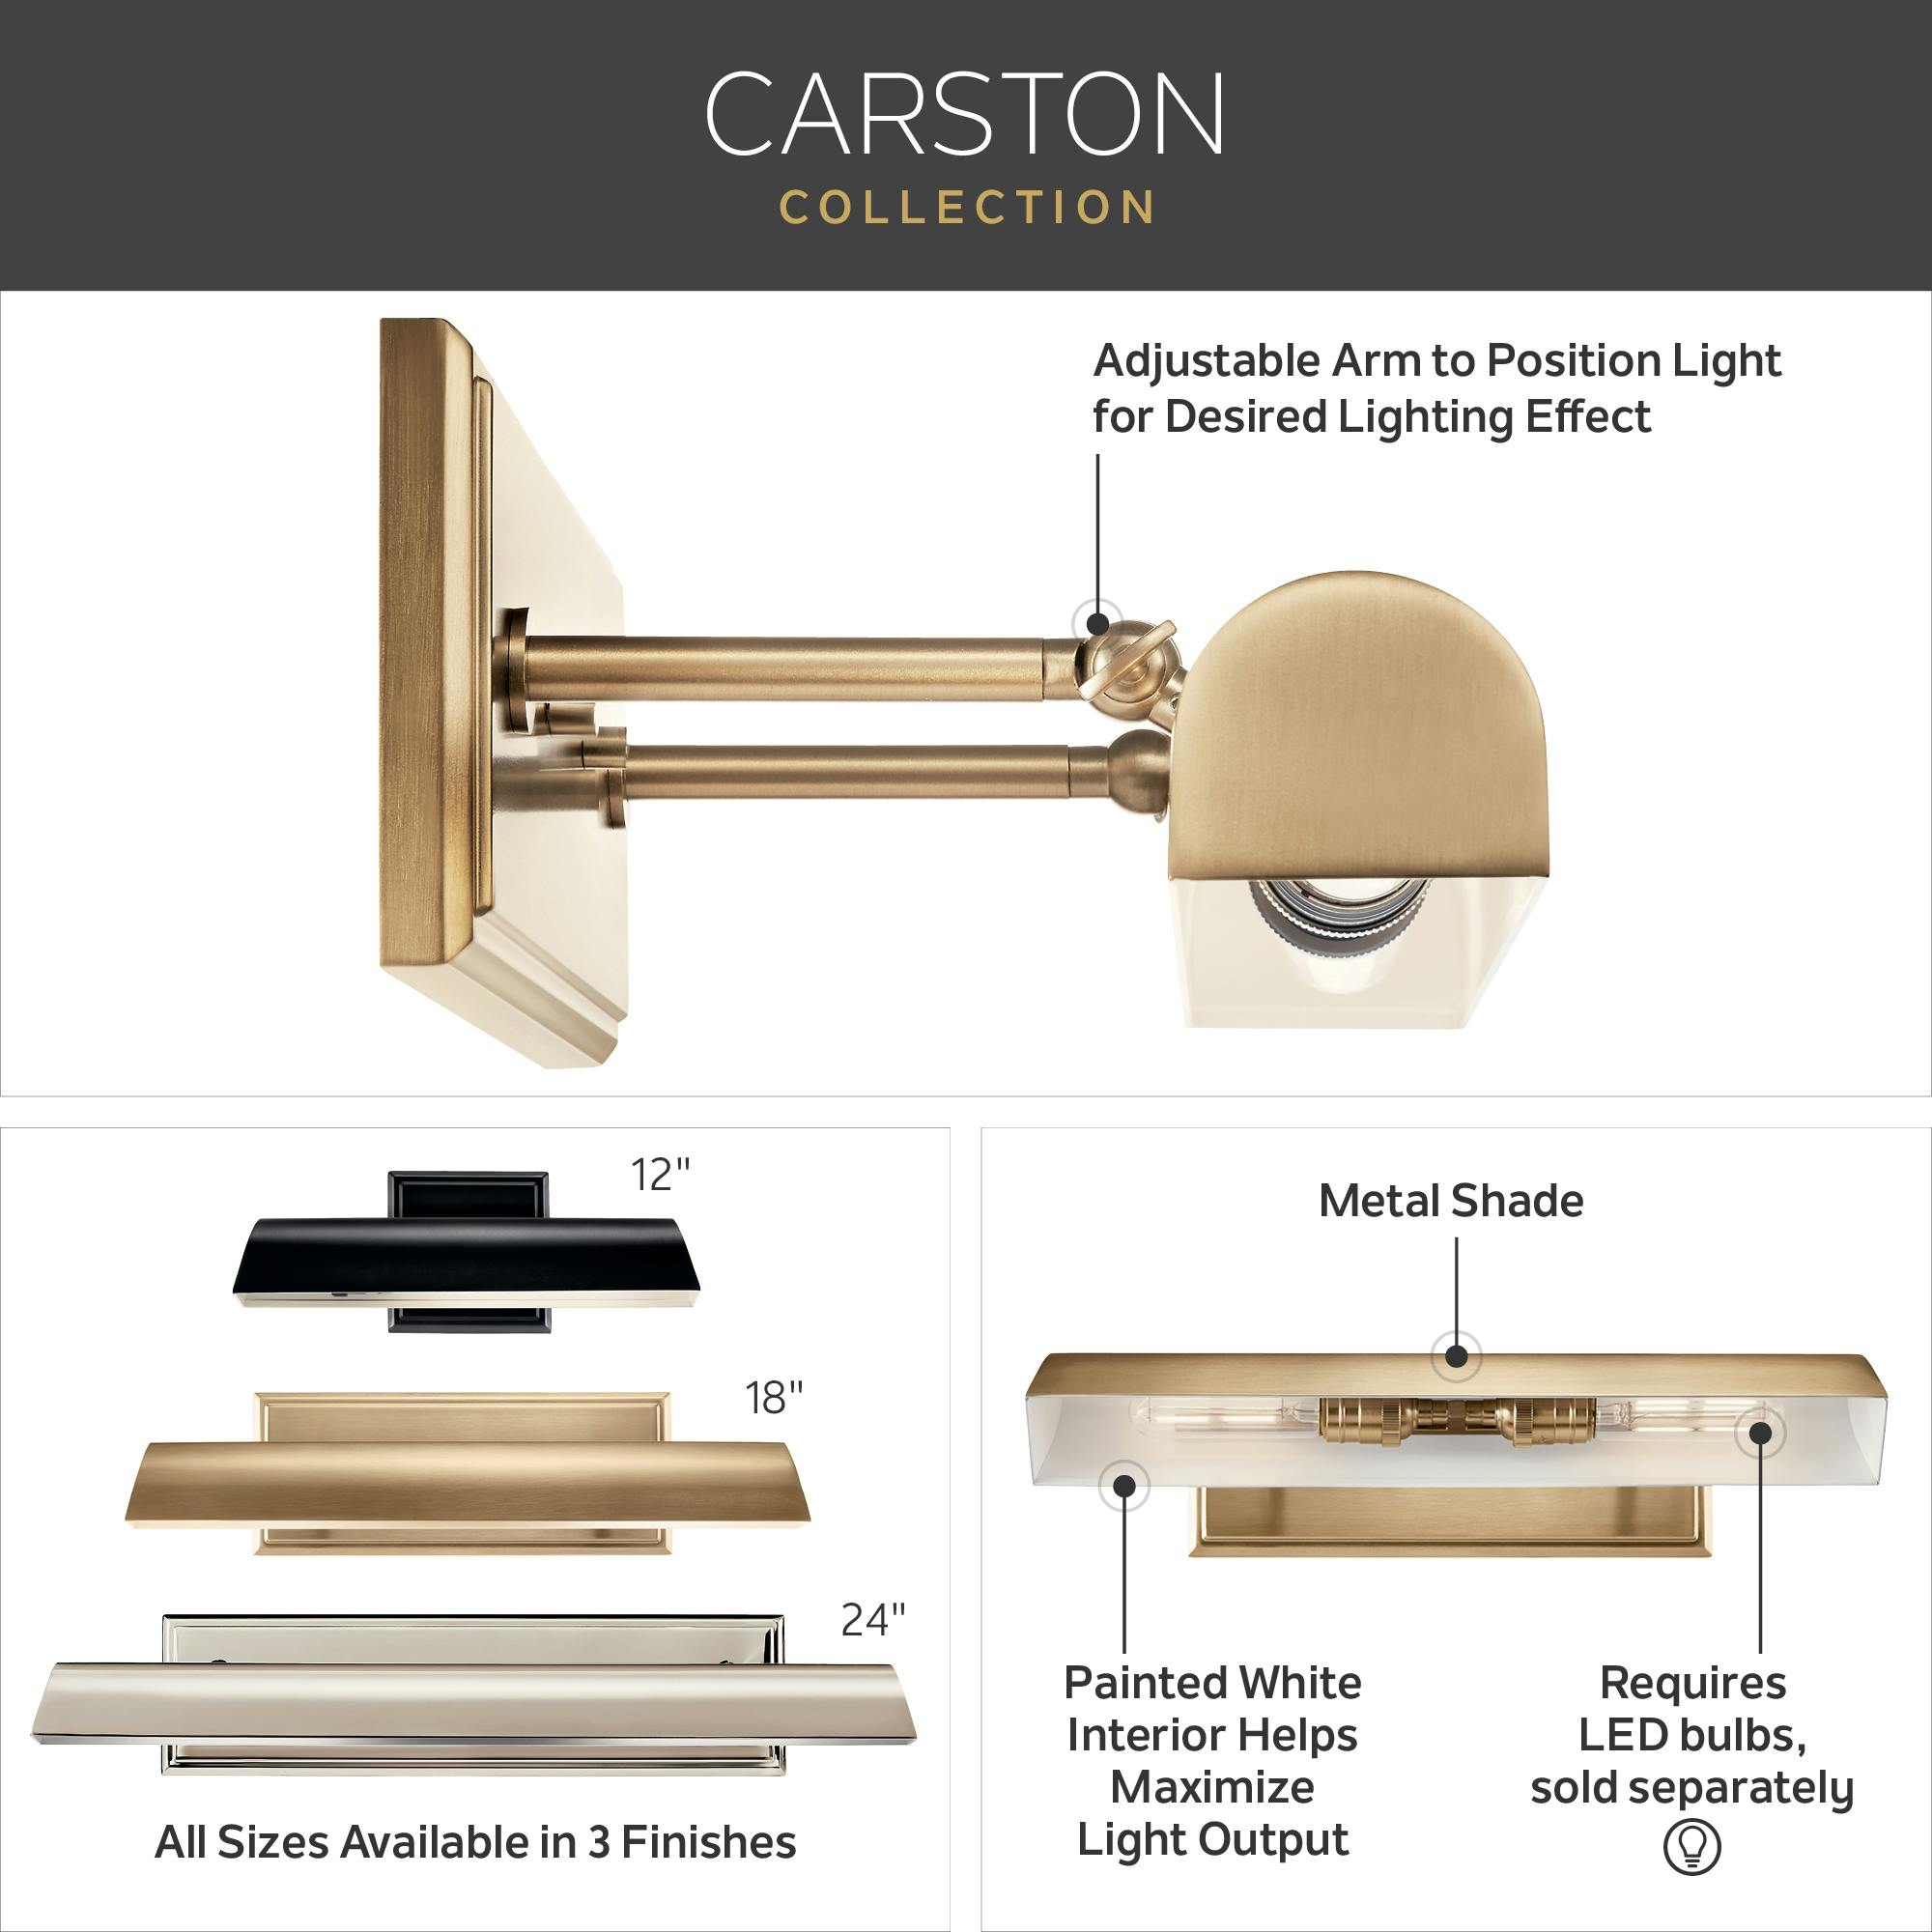 Carston 24" 2-Light Picture Light